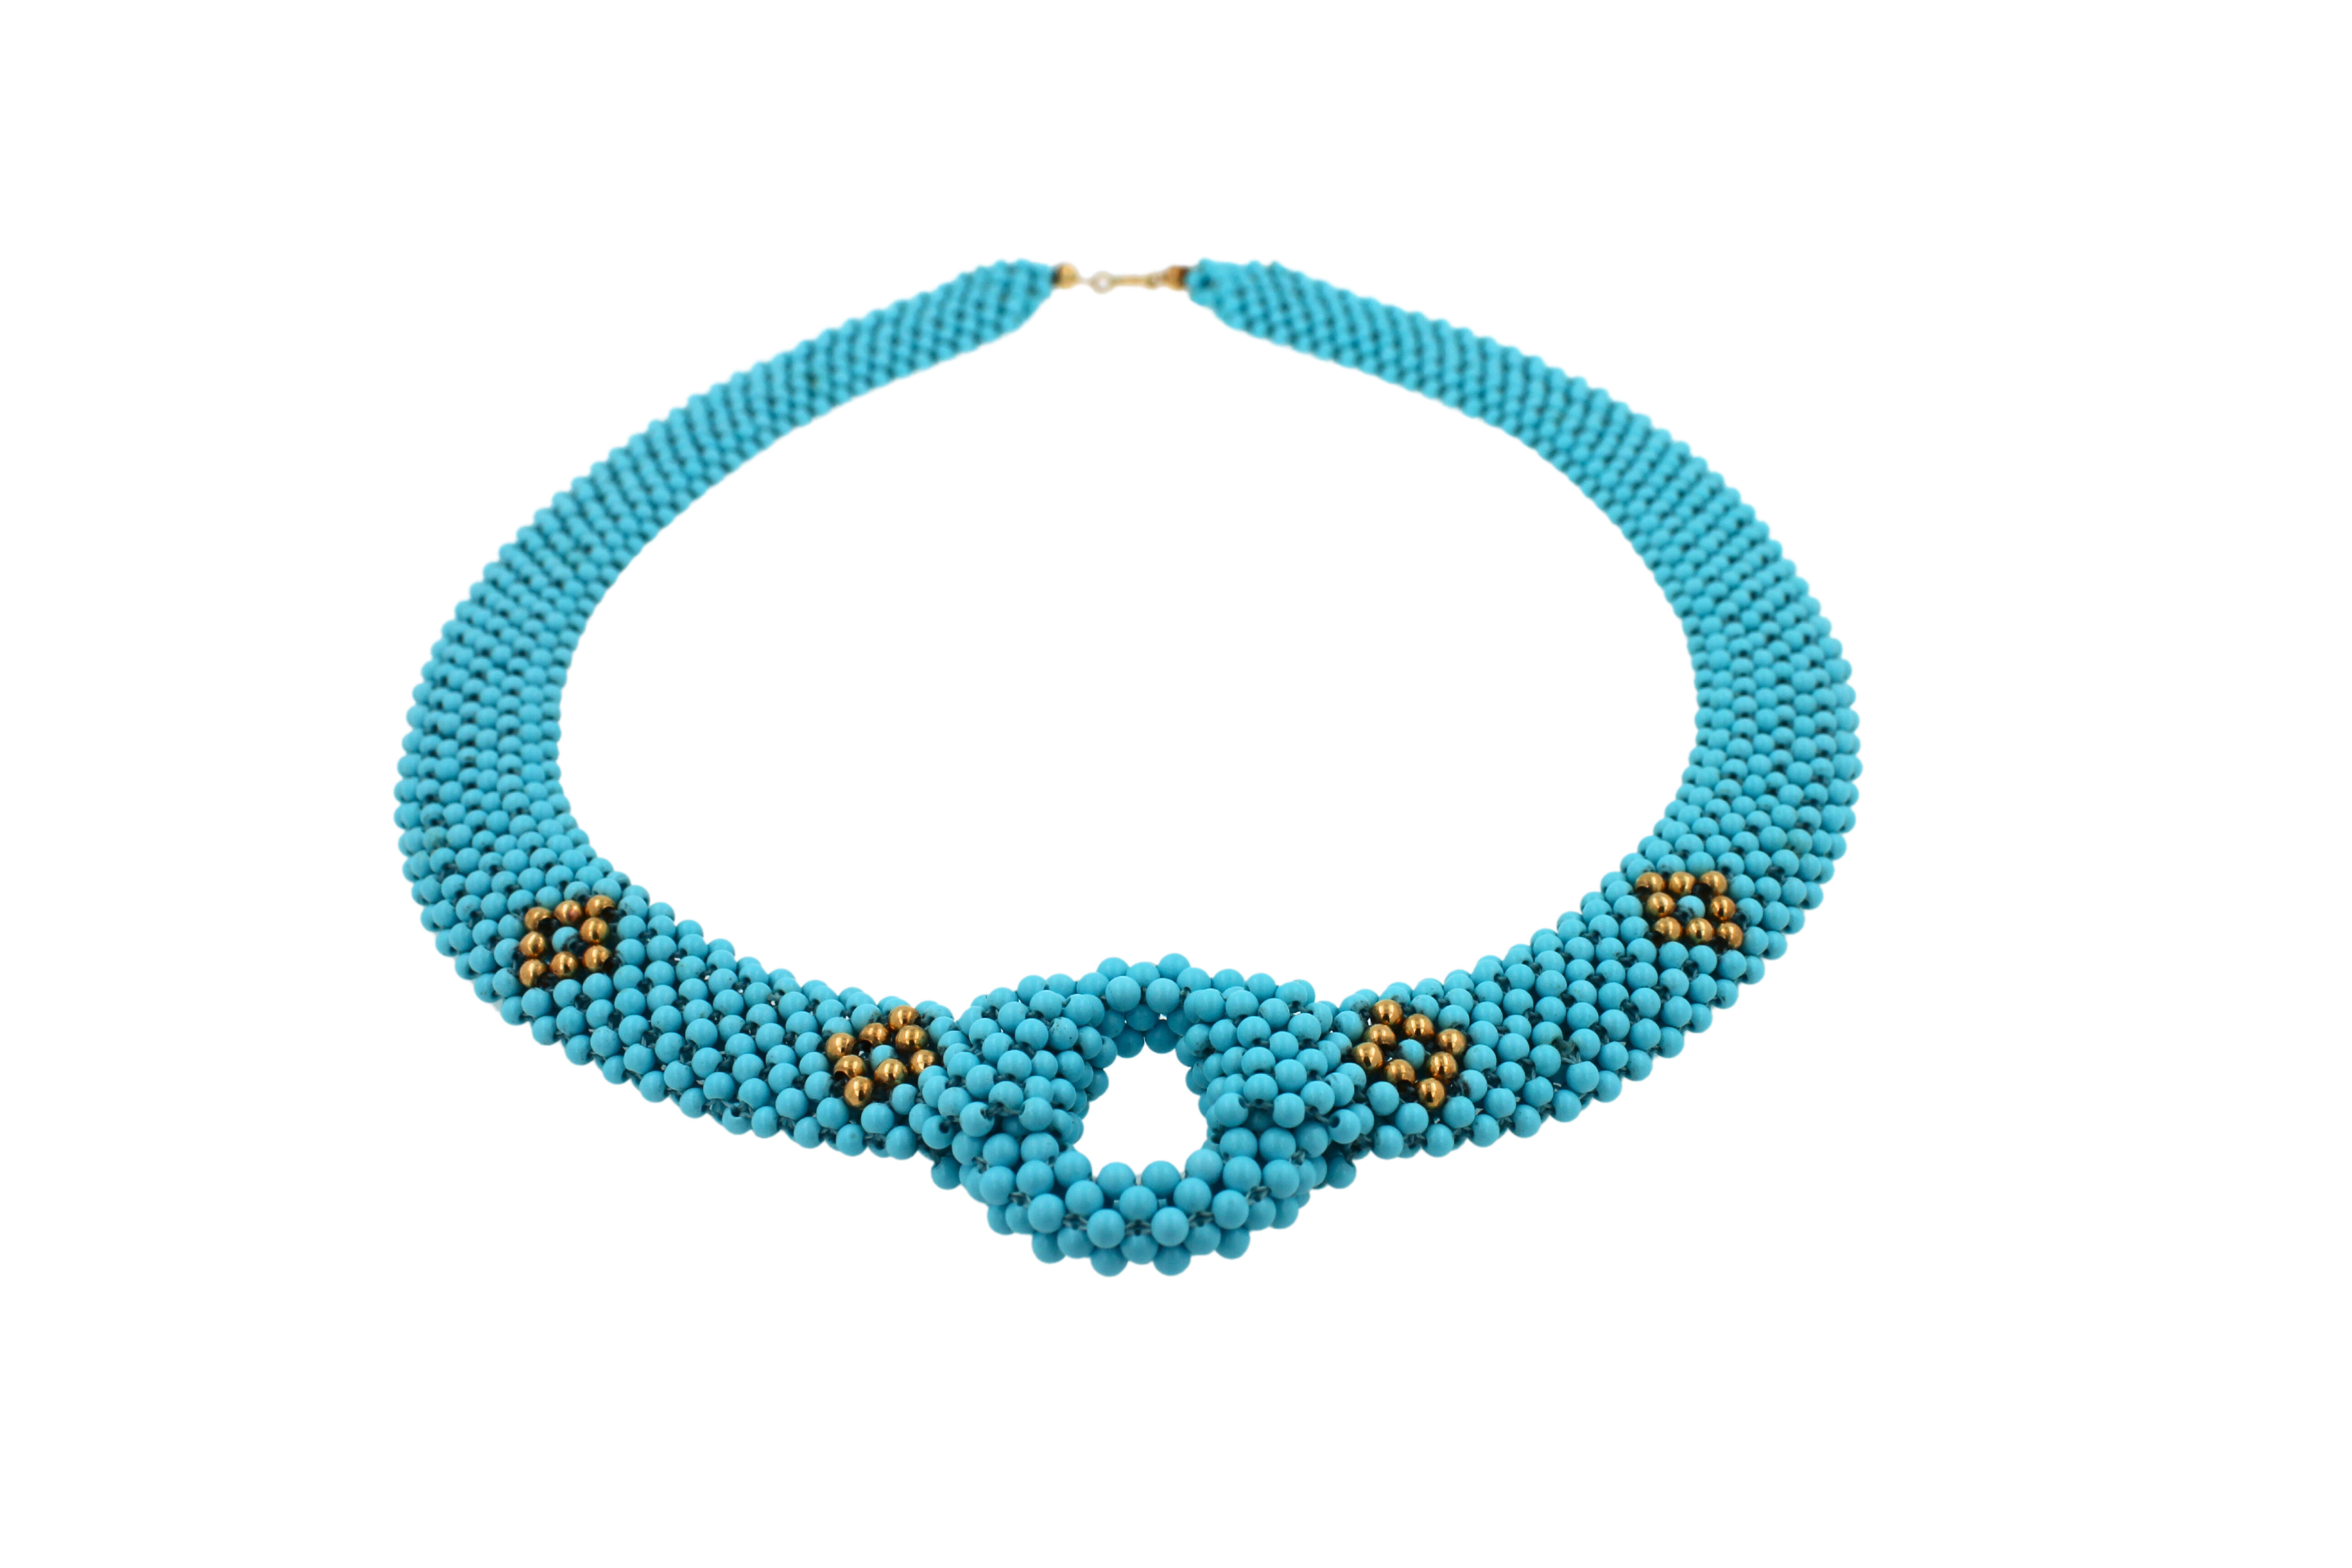 Teal Blue Turquoise Round Fancy Beads Short Unique Choker Gold Statement Necklace
Width of Necklace: 16mm 
Center Width: 30mm
14K Gold Beads + Clasp
Length of Necklace: 18 Inches
Handmade & Knit in Italy
